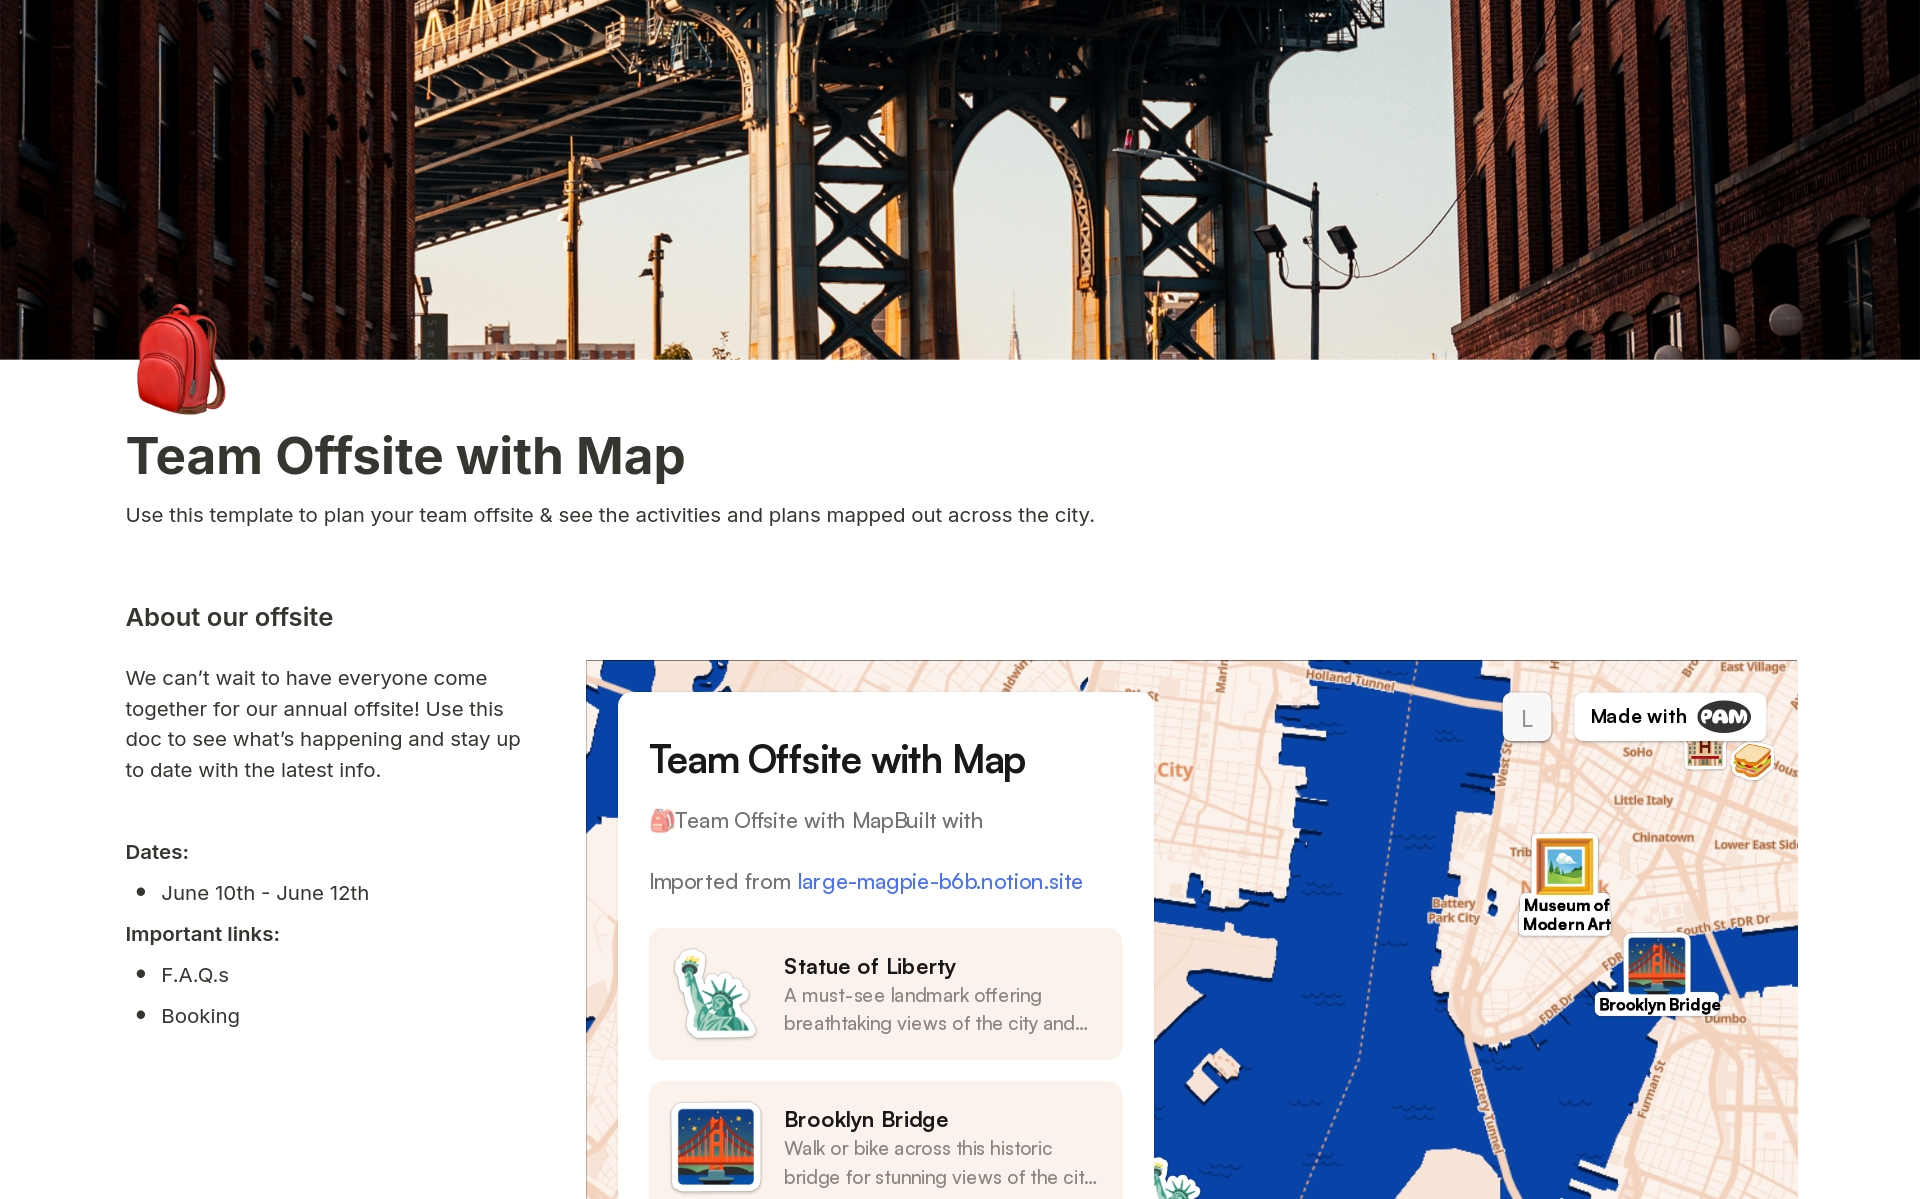 Team Offsite Planner with Mapのテンプレートのプレビュー